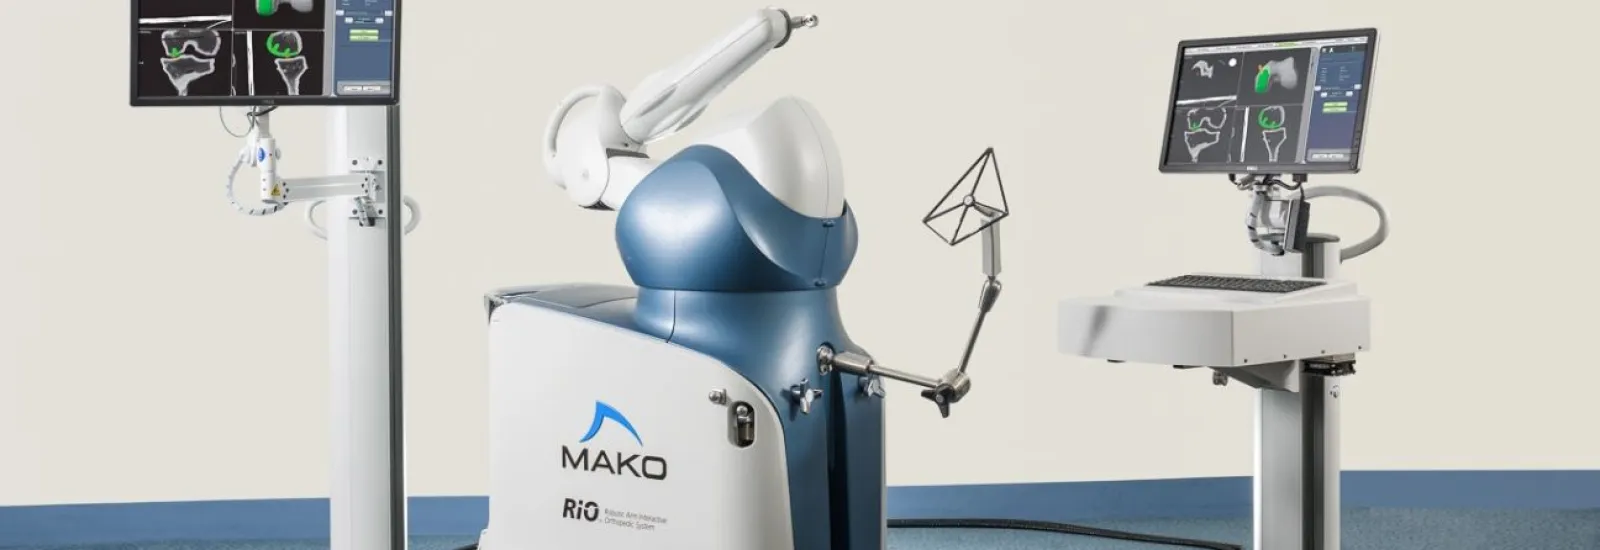 An Analysis of the Mako Surgical Robot – GW Chronicle of the Yawp